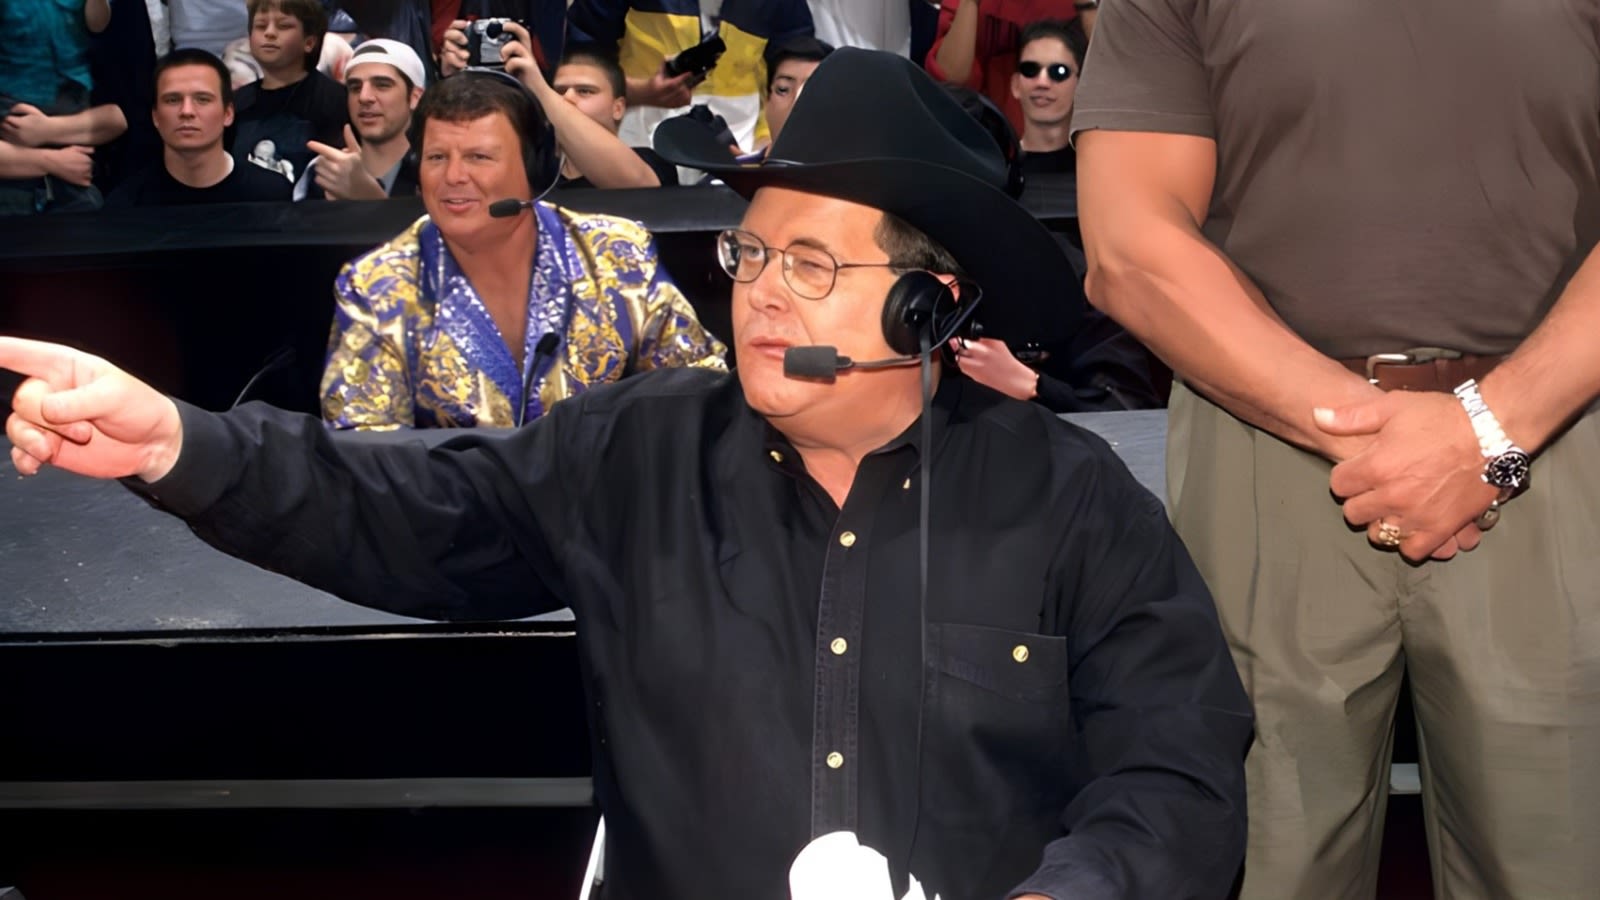 Former WCW Valet Says She Dated AEW's Jim Ross: 'He's Rocked My World' - Wrestling Inc.